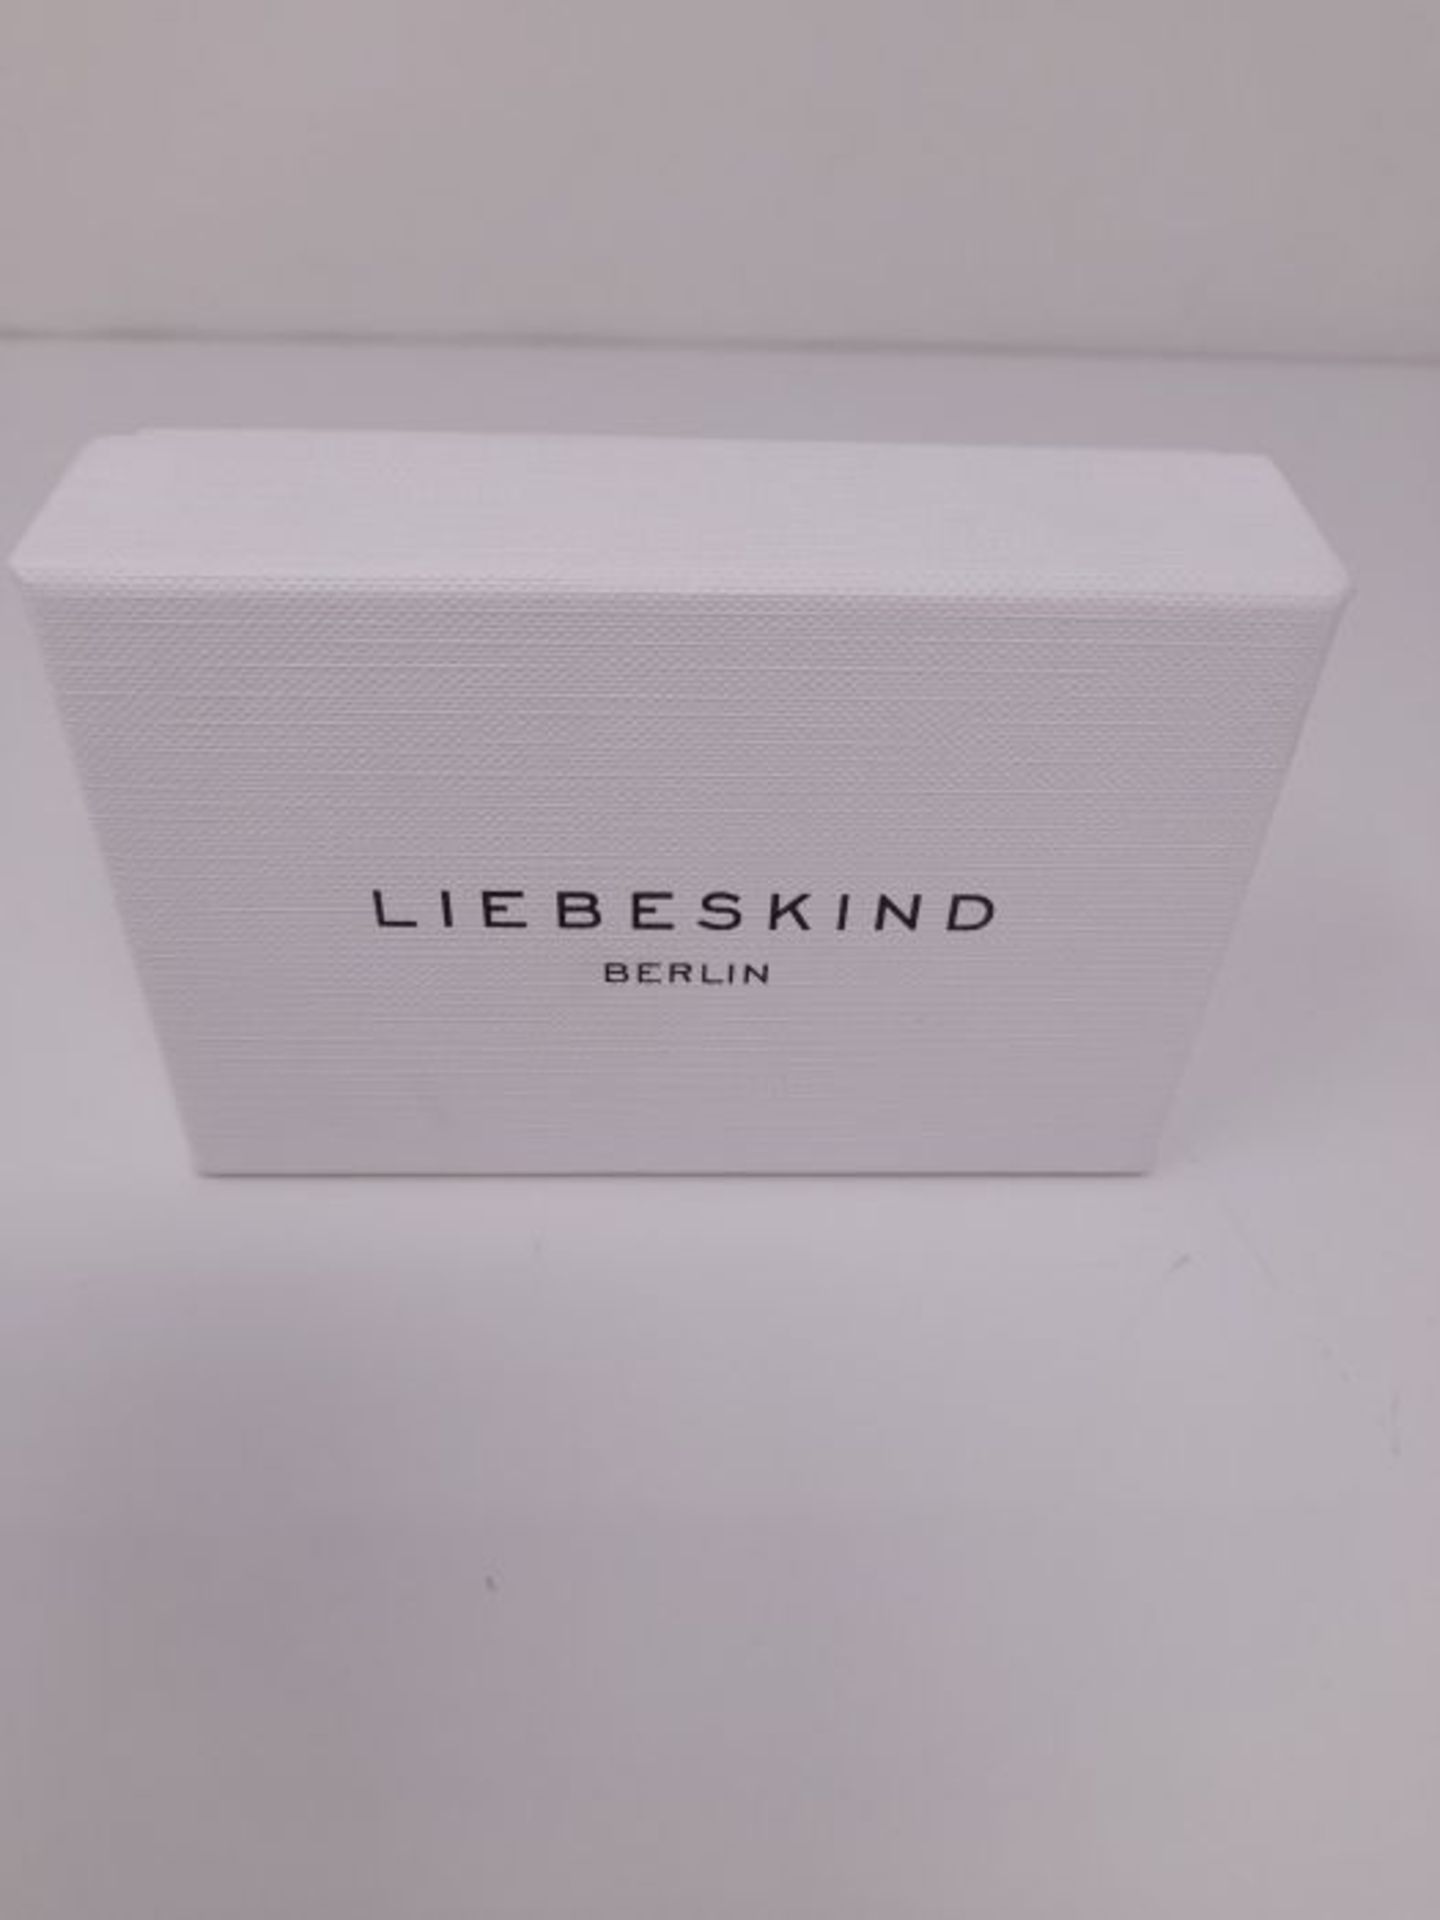 [CRACKED] LIEBESKIND BERLIN Beads 6mm mit Logotag in Edelstahl - Image 2 of 3